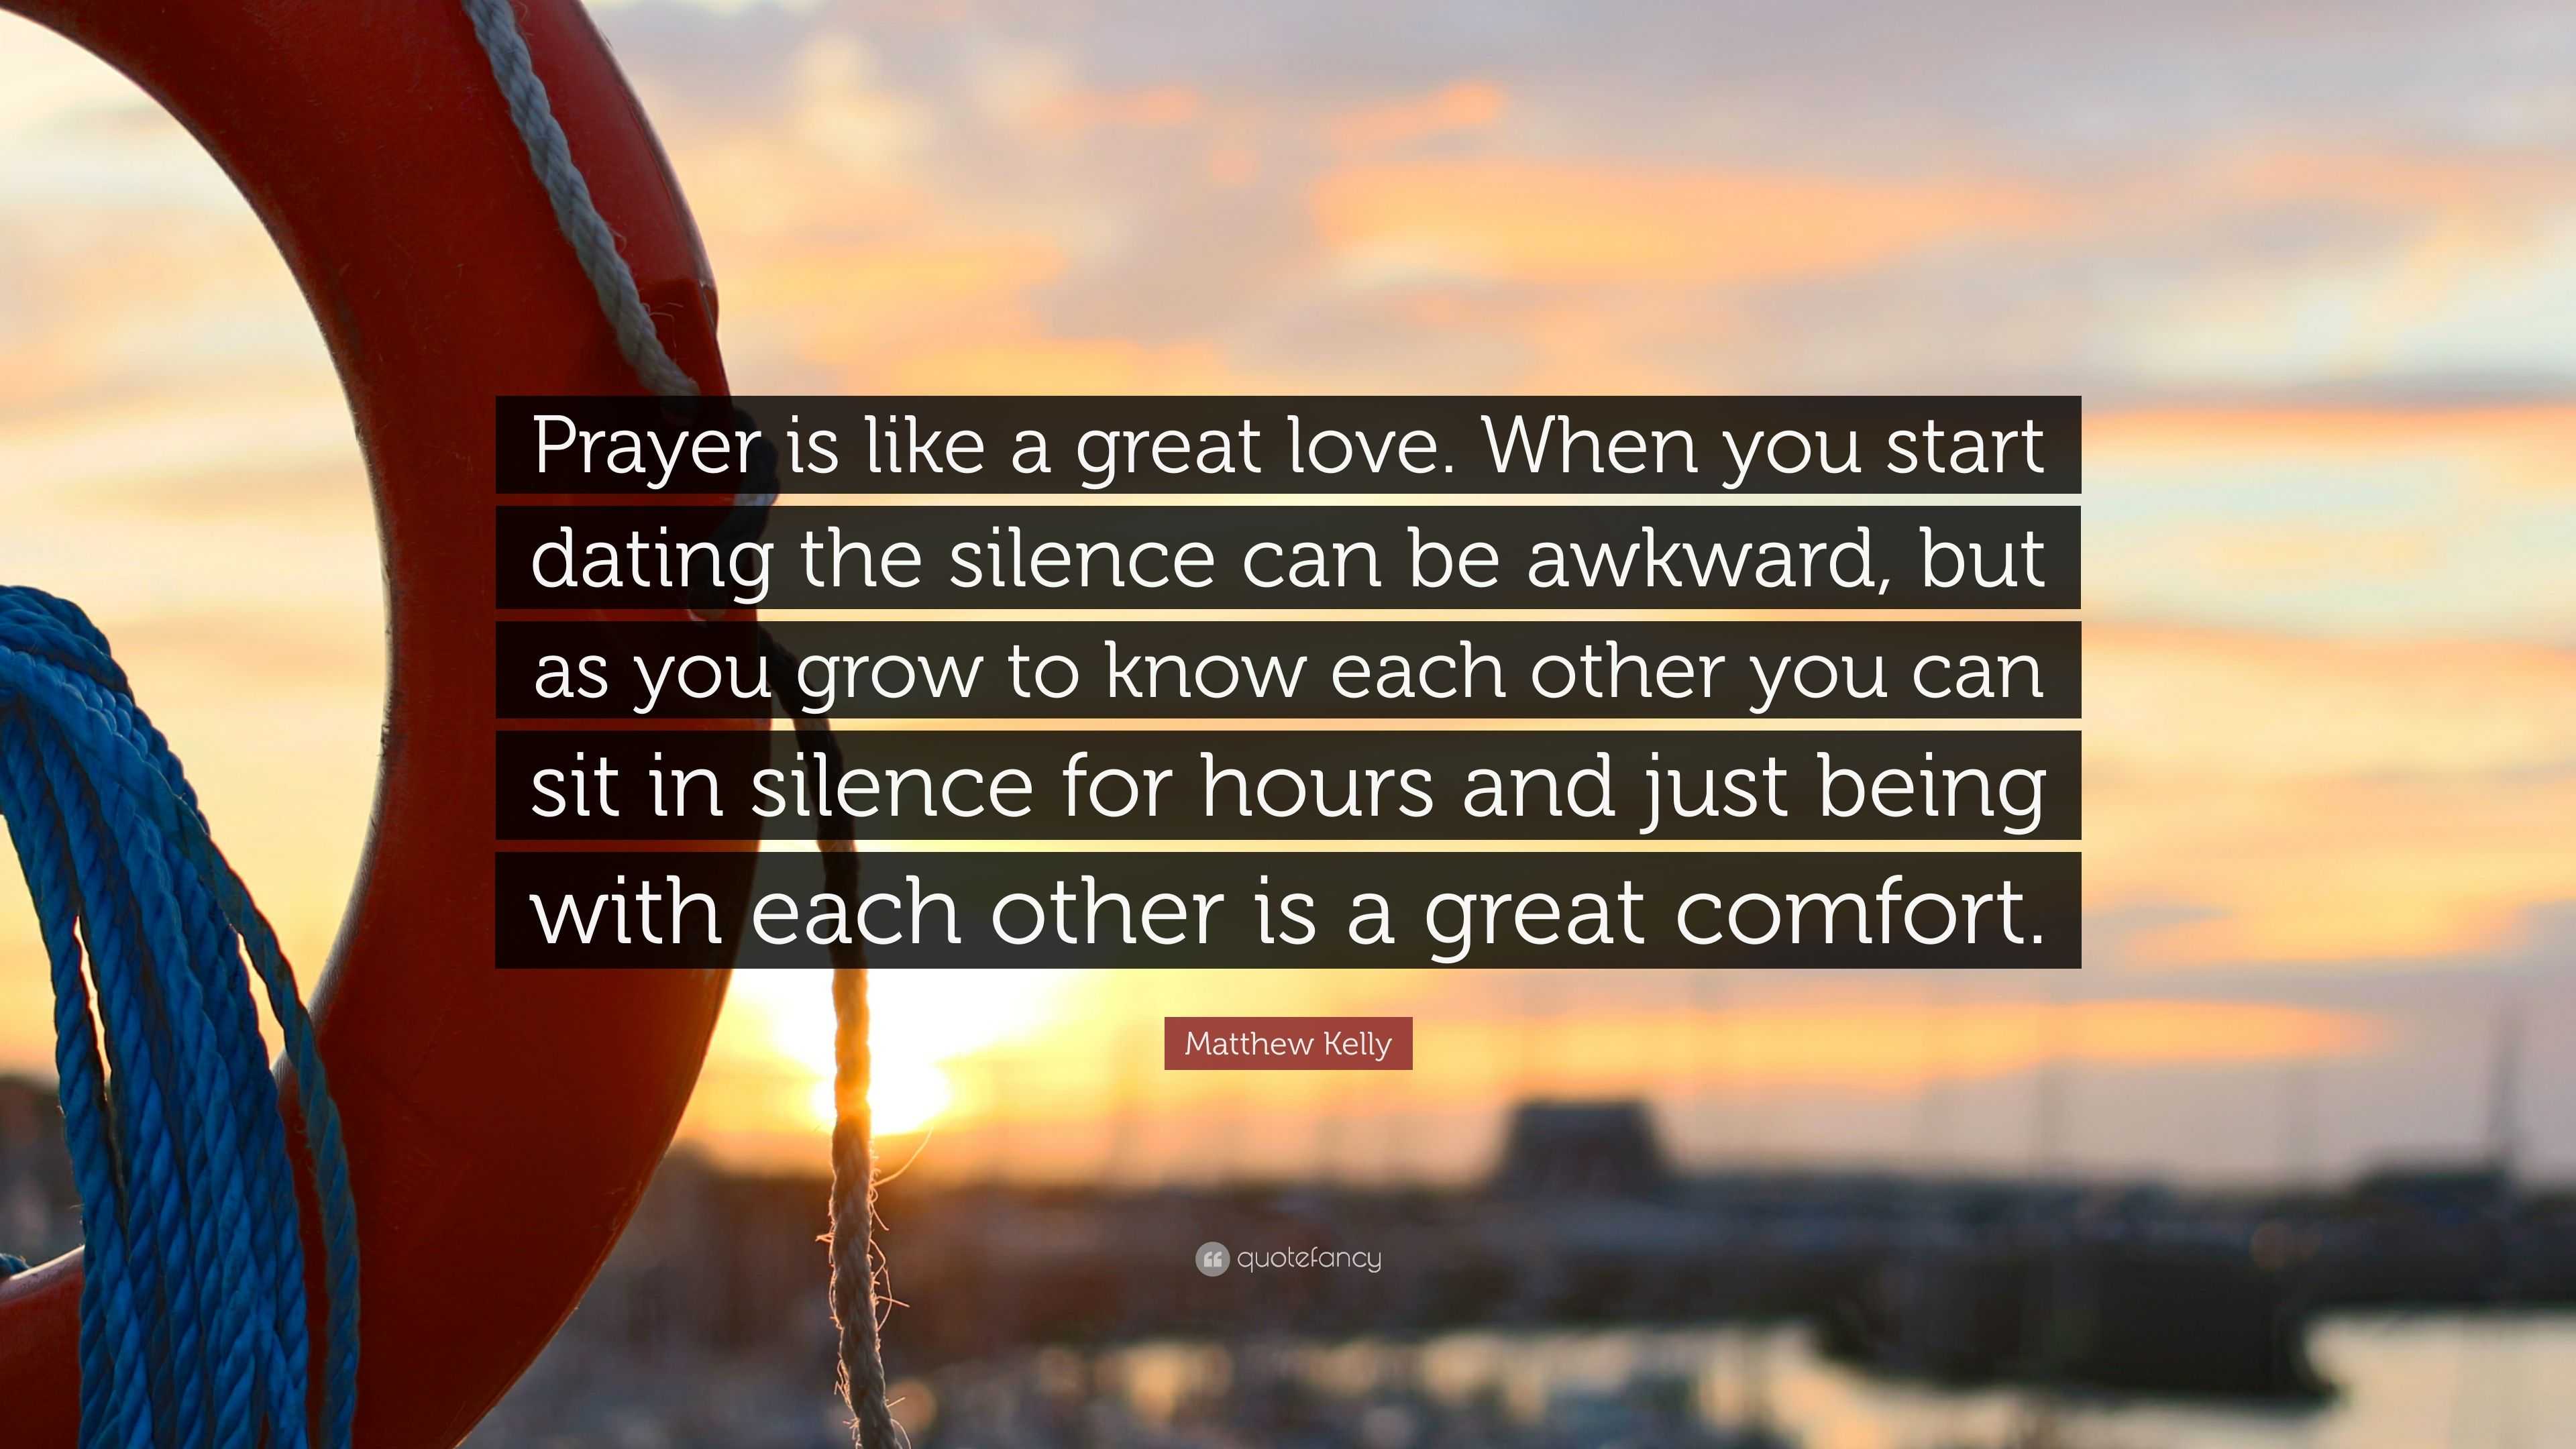 Matthew Kelly Quote “Prayer is like a great love When you start dating